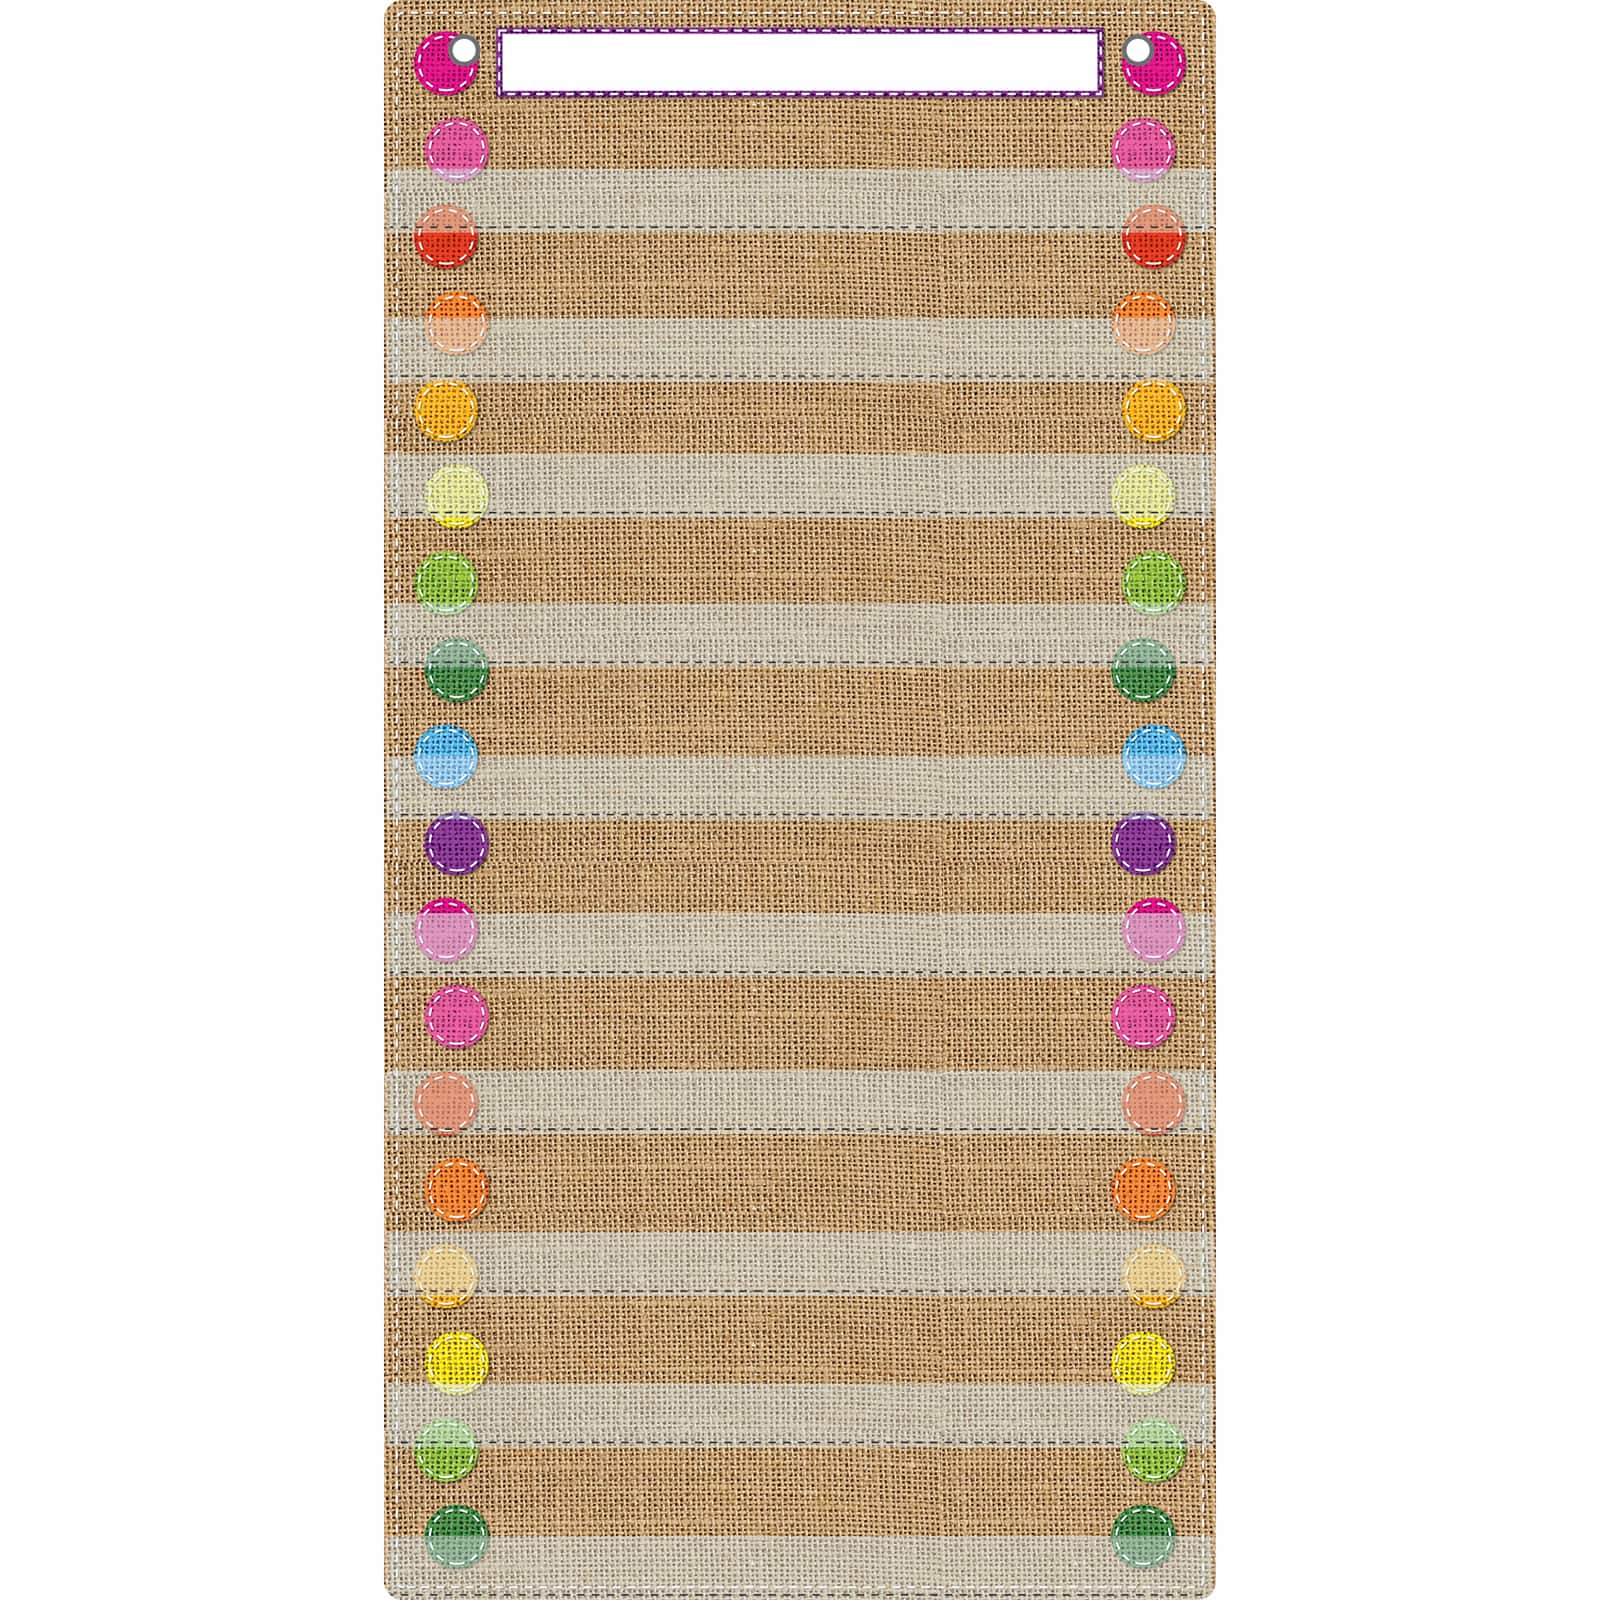 Buy the Smart Poly™ 13" x 25" Burlap Stitched Pocket Chart at Michaels.com